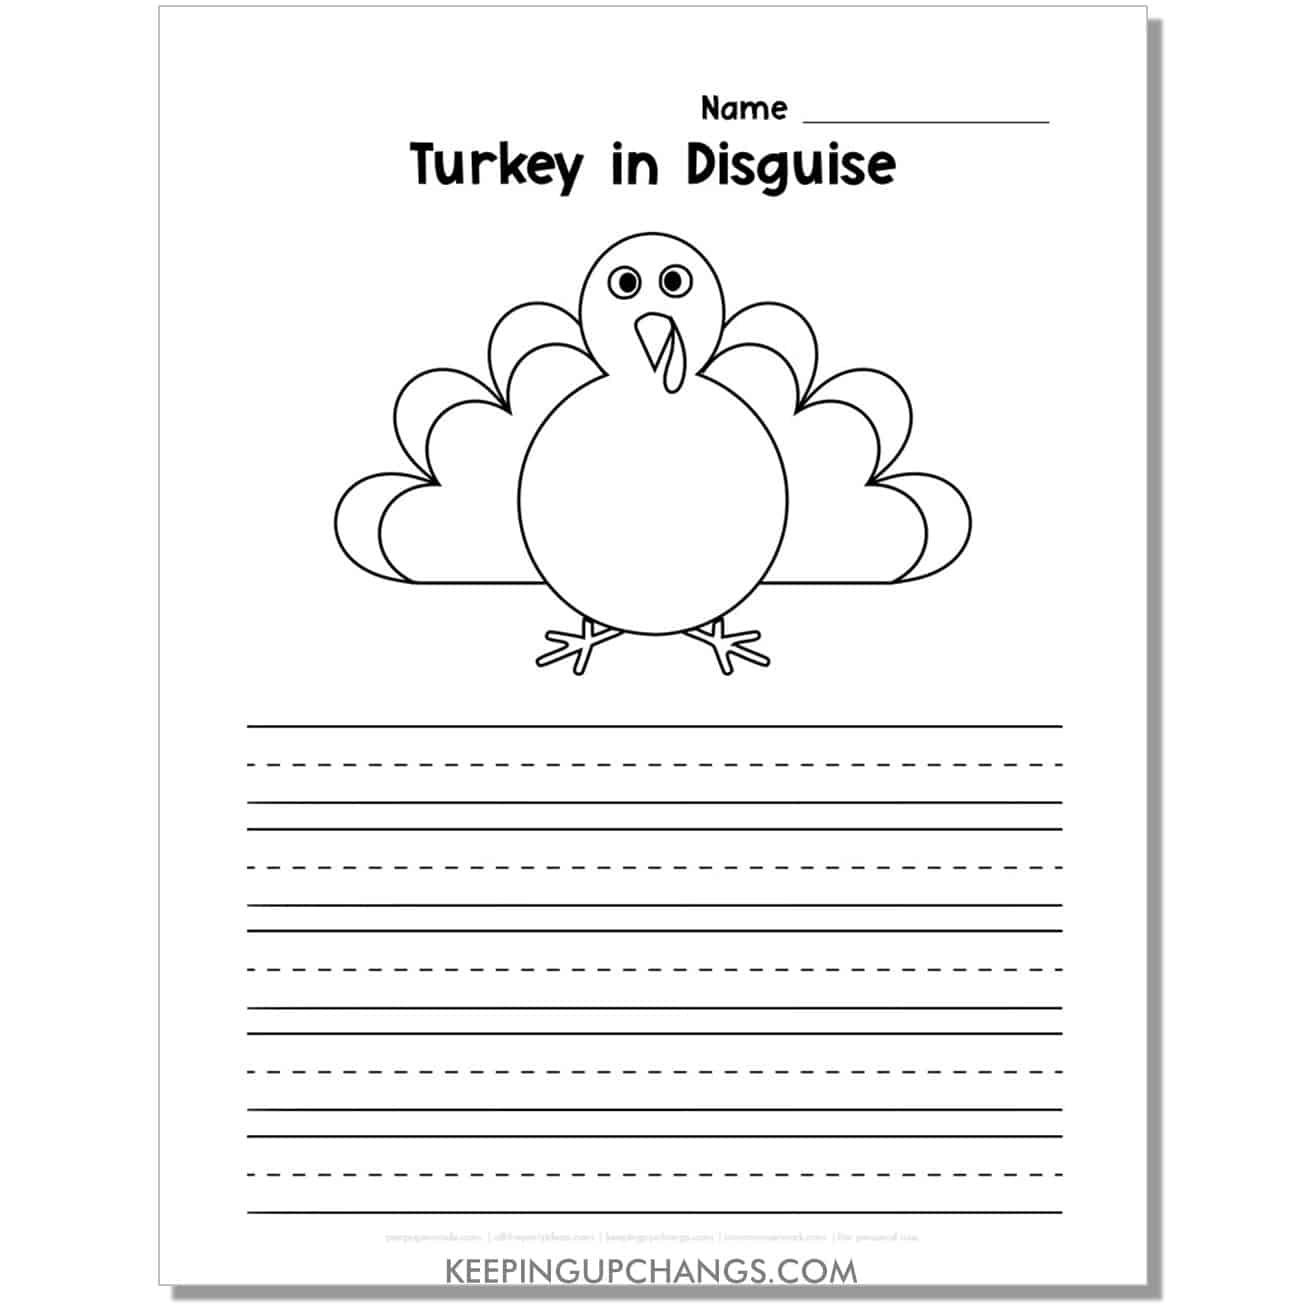 tom the turkey disguise printable template with picture and dotted primary lines for writing.